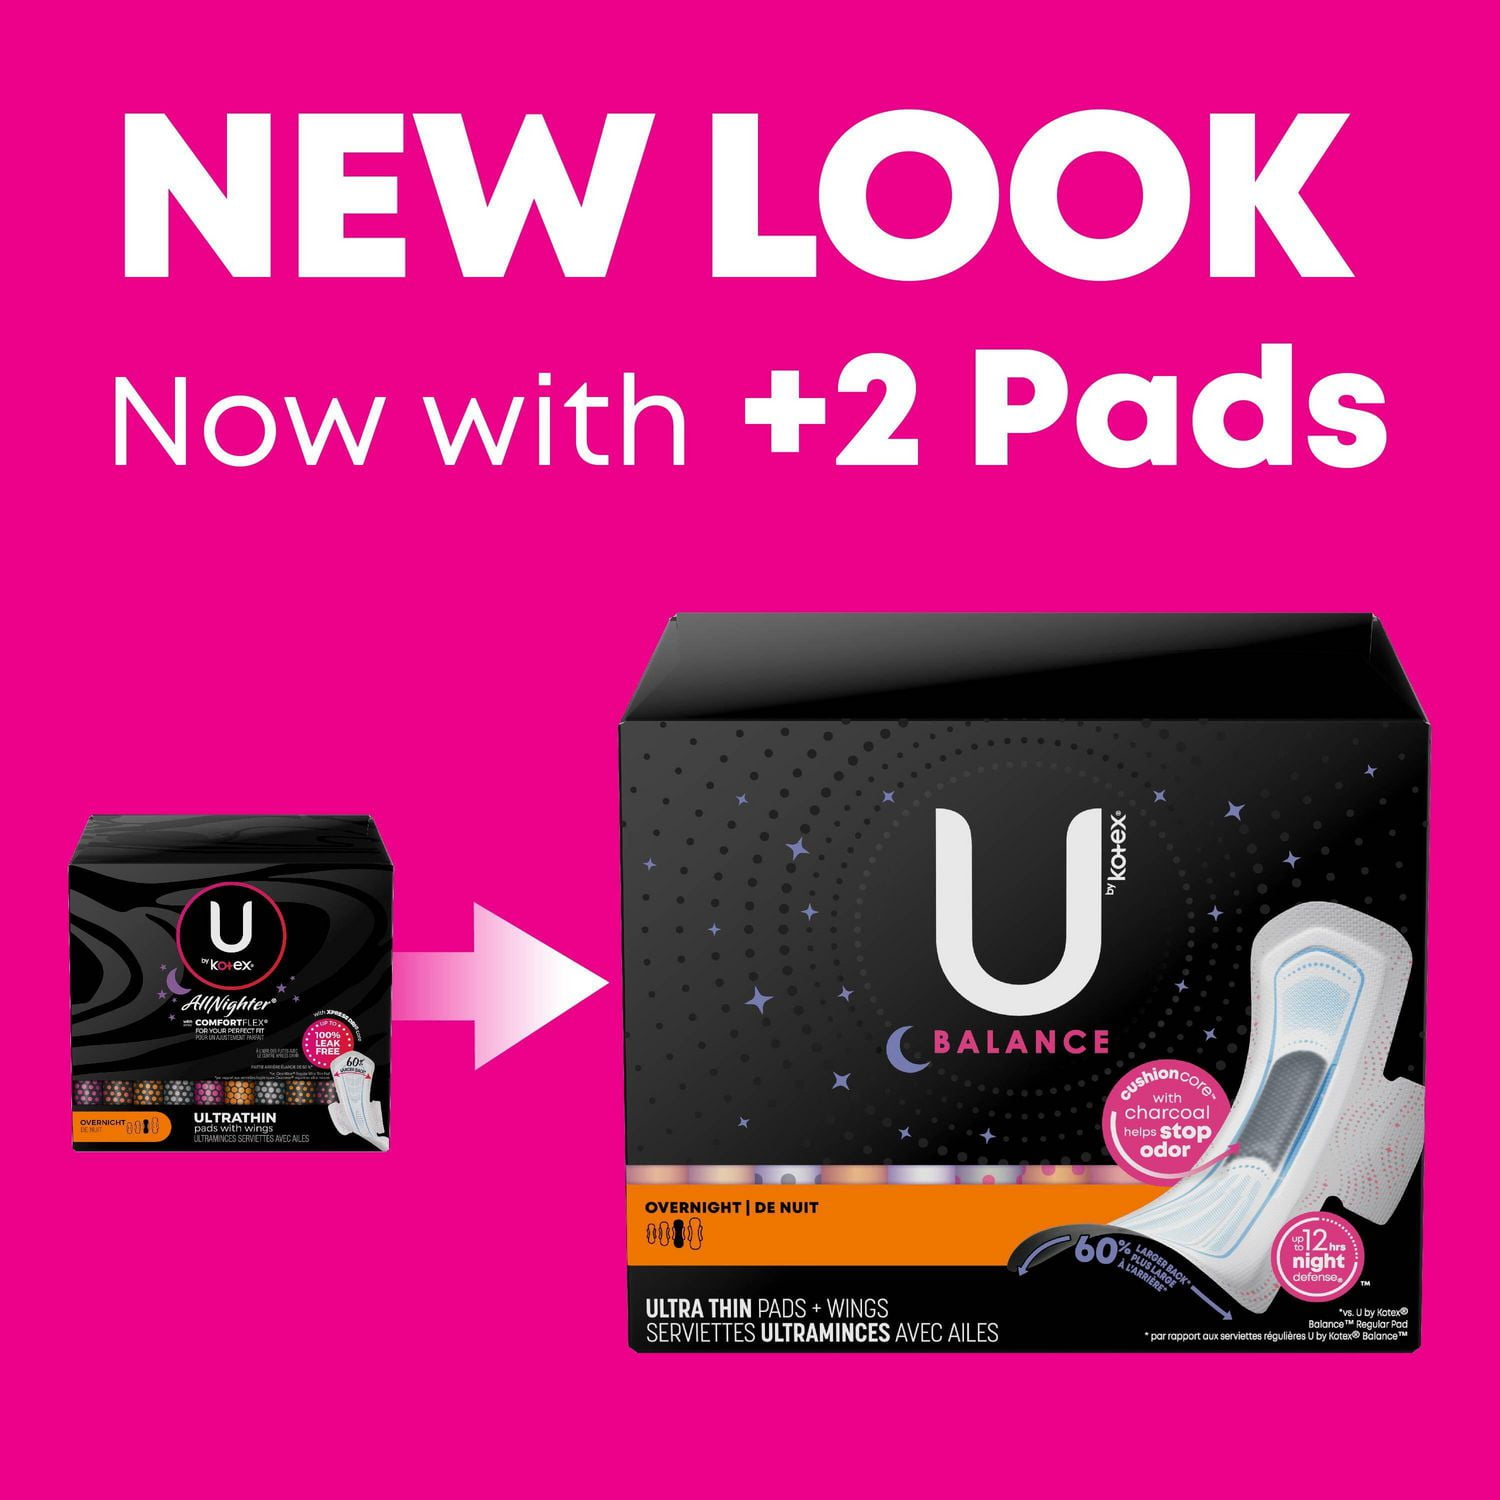 Buy U By Kotex Extra Overnight Ultimate Pads with Wings 6 Pack Online